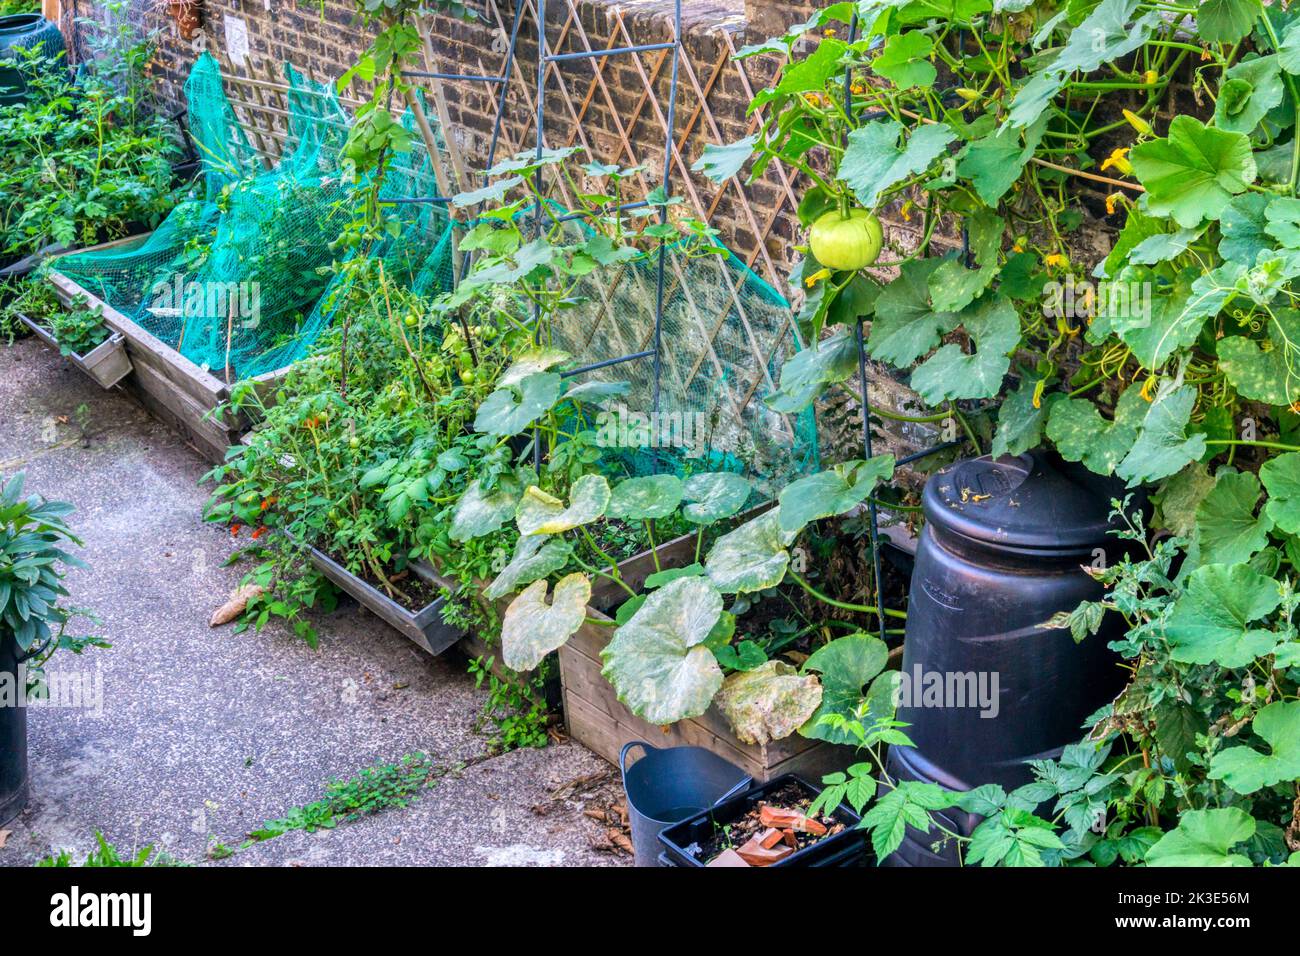 A pumpkin growing trained up a brick wall in a city urban garden setting. Stock Photo